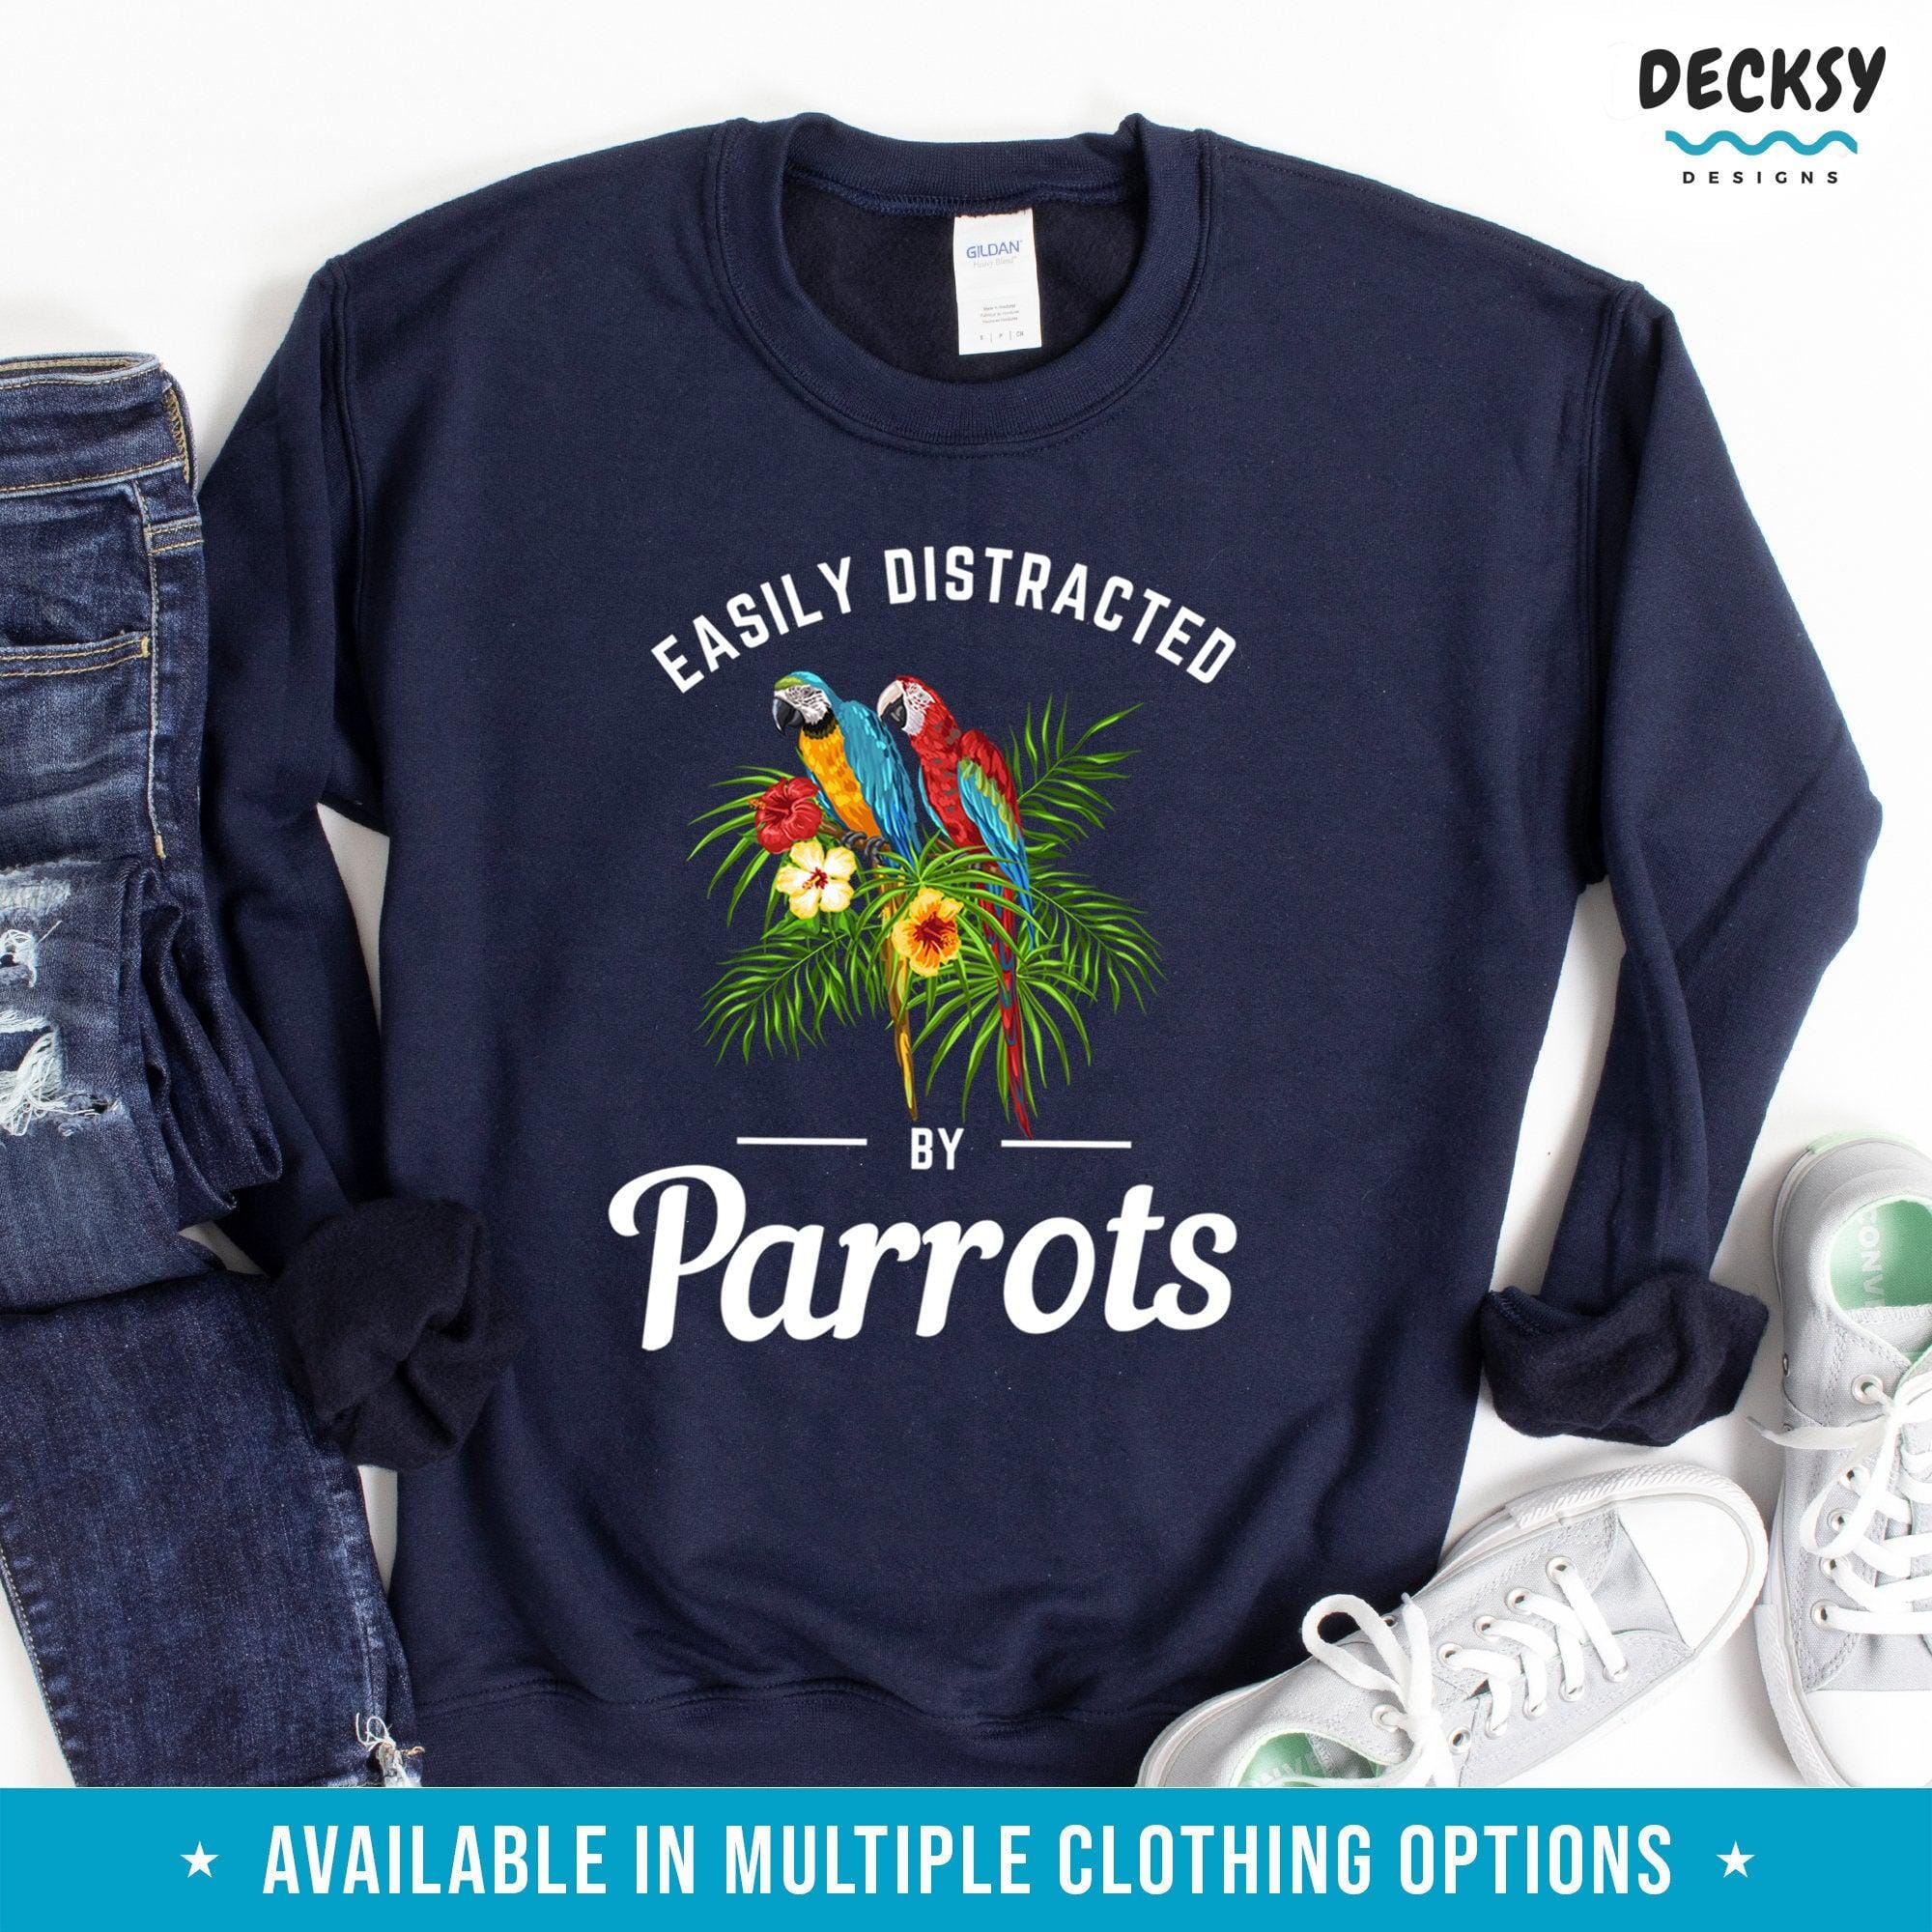 Parrot Lover Shirt, Bird Gift-Clothing:Gender-Neutral Adult Clothing:Tops & Tees:T-shirts:Graphic Tees-DecksyDesigns